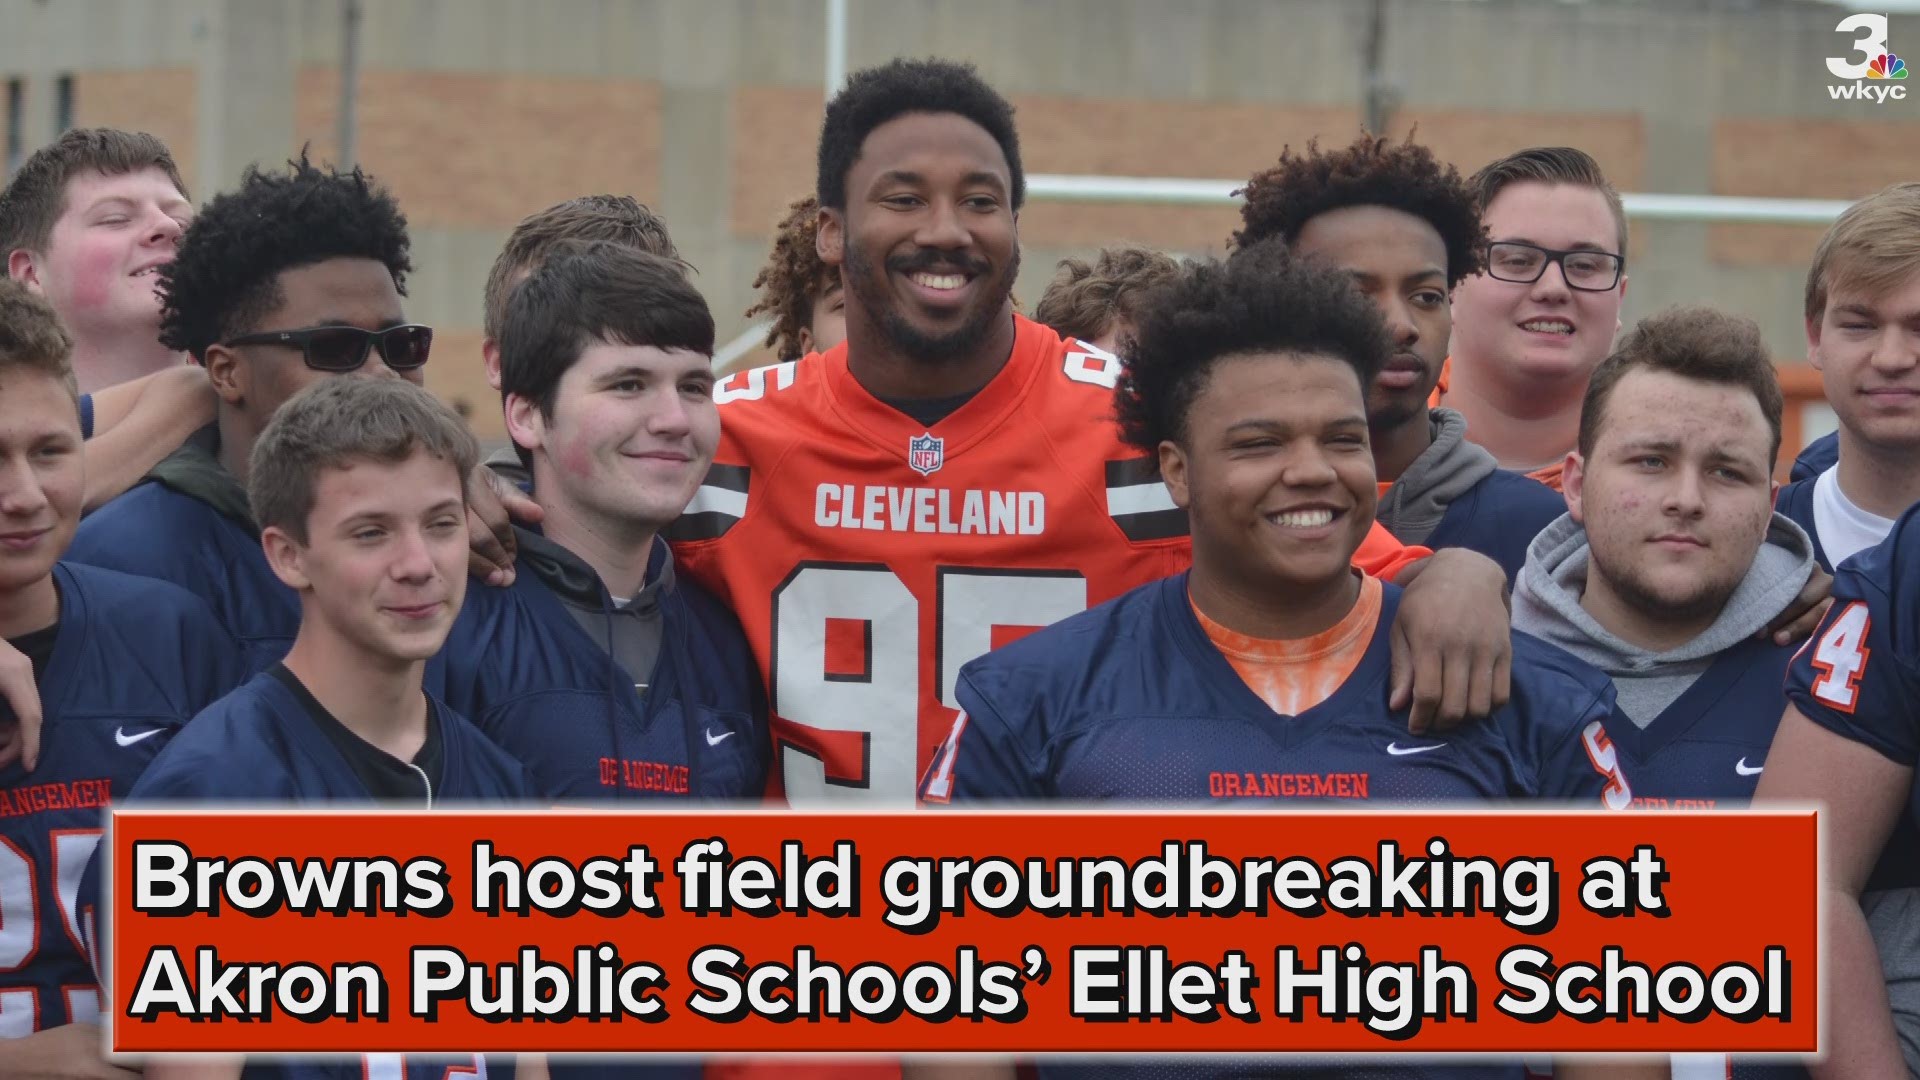 Cleveland Browns defensive end Myles Garrett took part in a groundbreaking ceremony for a new football field at Ellet High School in Akron Tuesday.